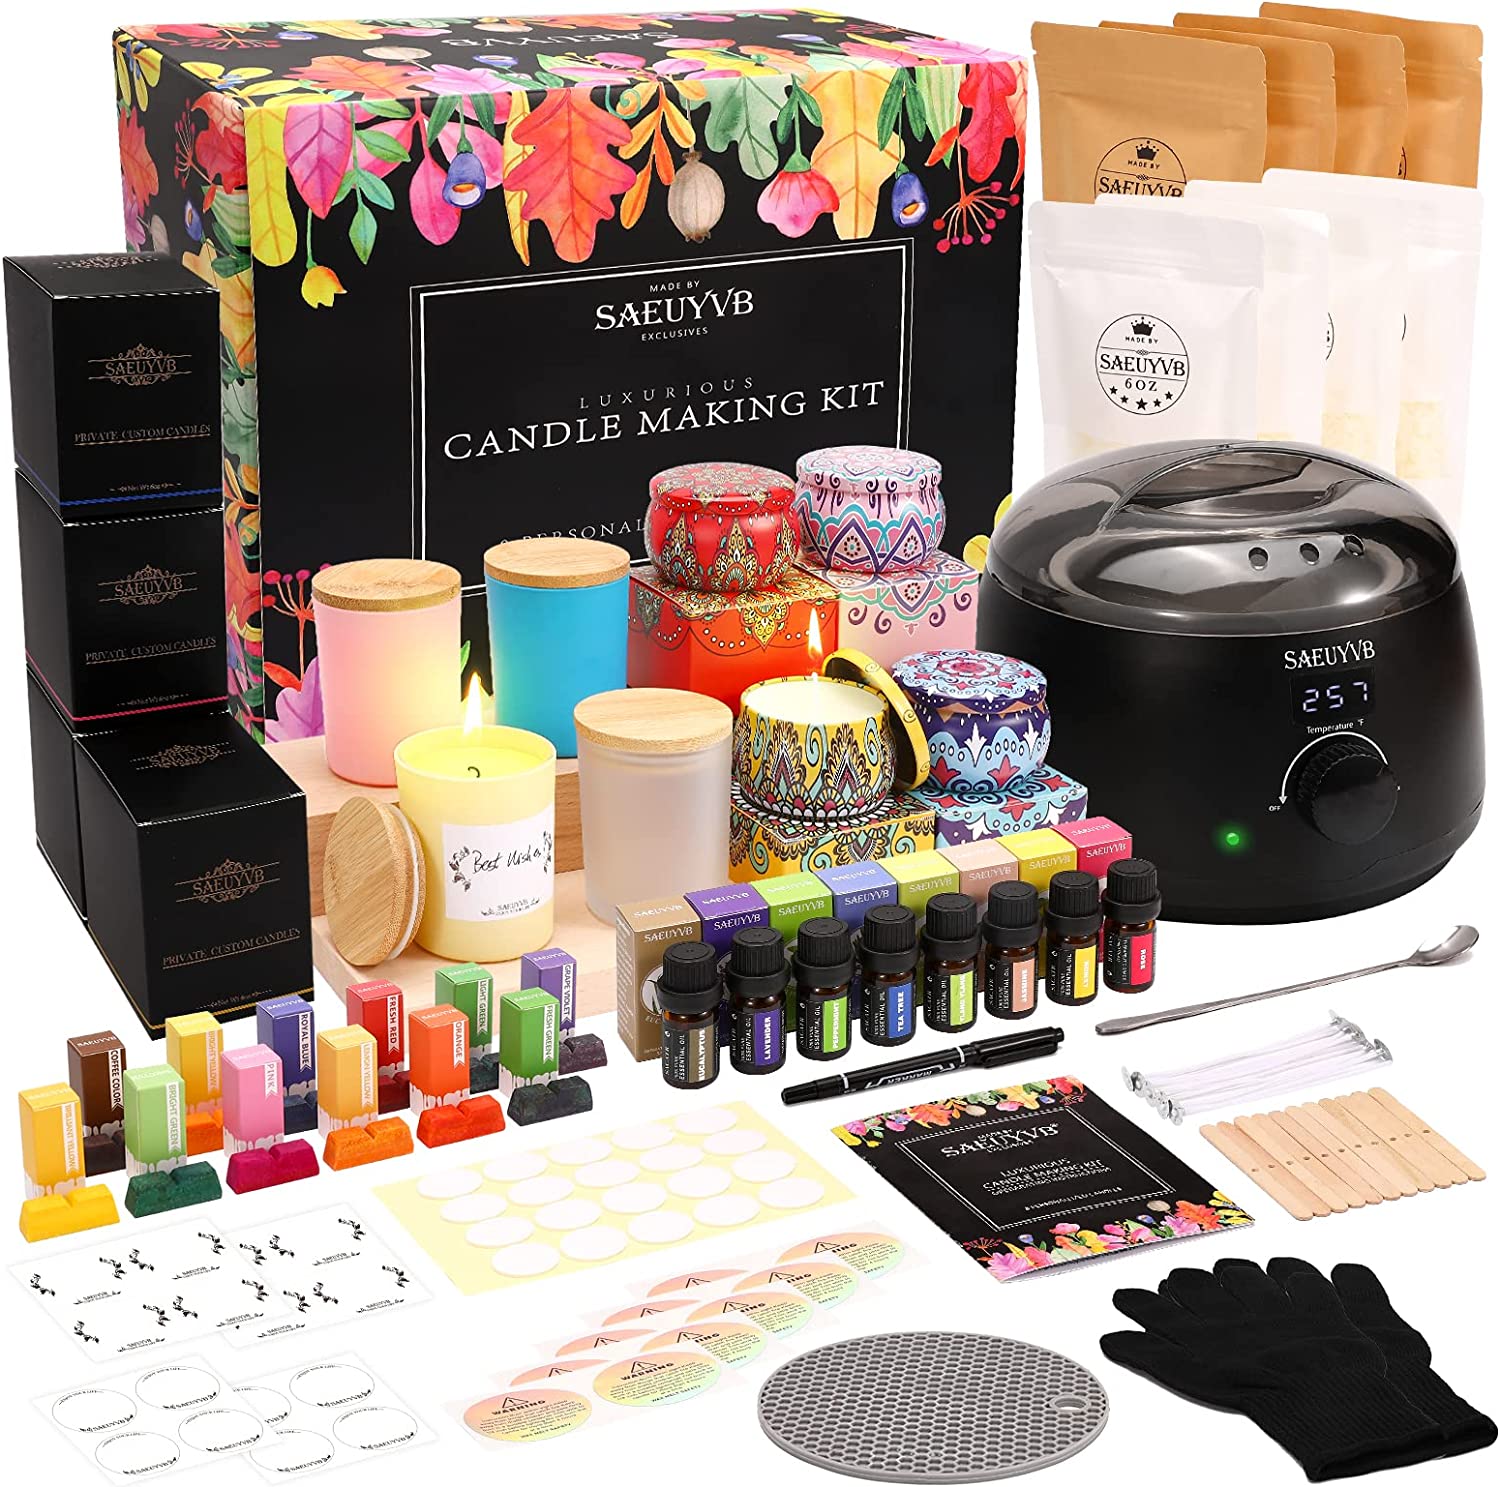 J Mark DIY Candle Making Kit for Adults – 66 Pcs Candle Making Kit with Melter, Decorative Candle Tins, Natural Soy Wax, Dye, Fragrance Oils, Cotton